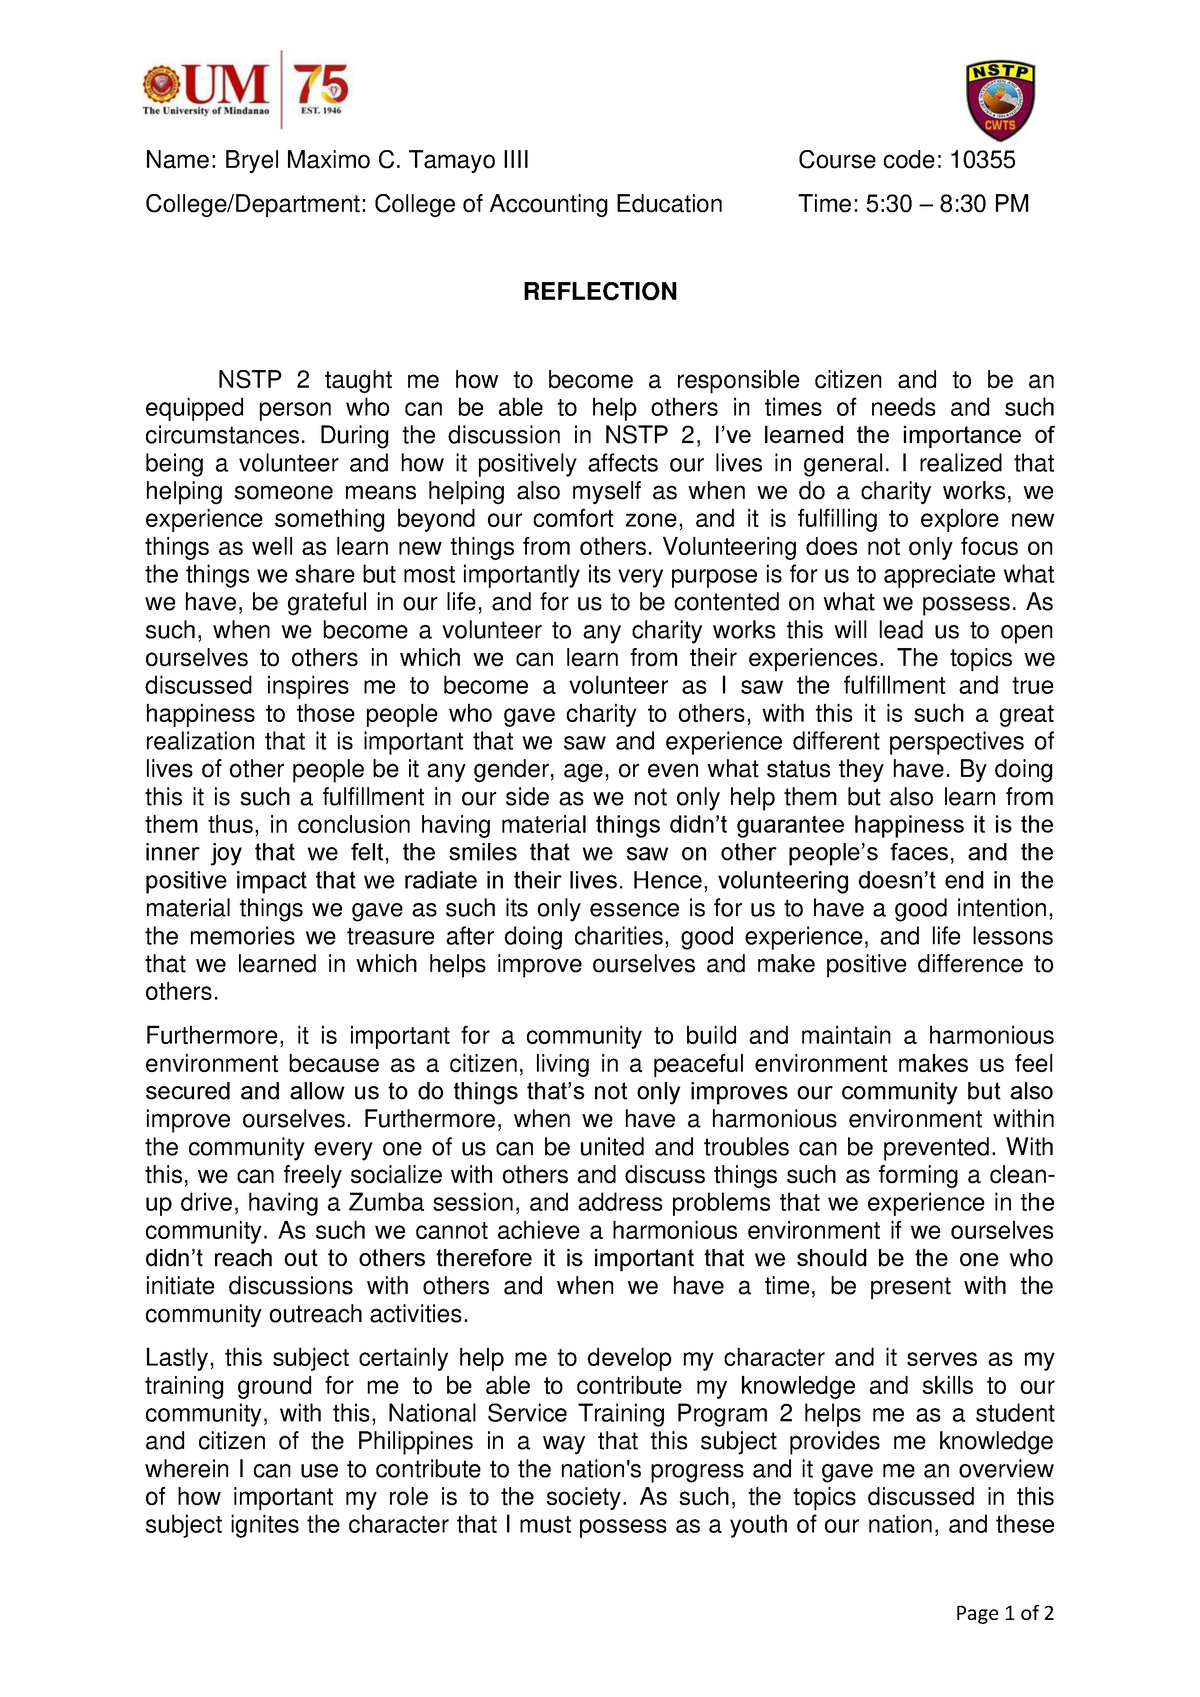 essay college nstp reflection paper